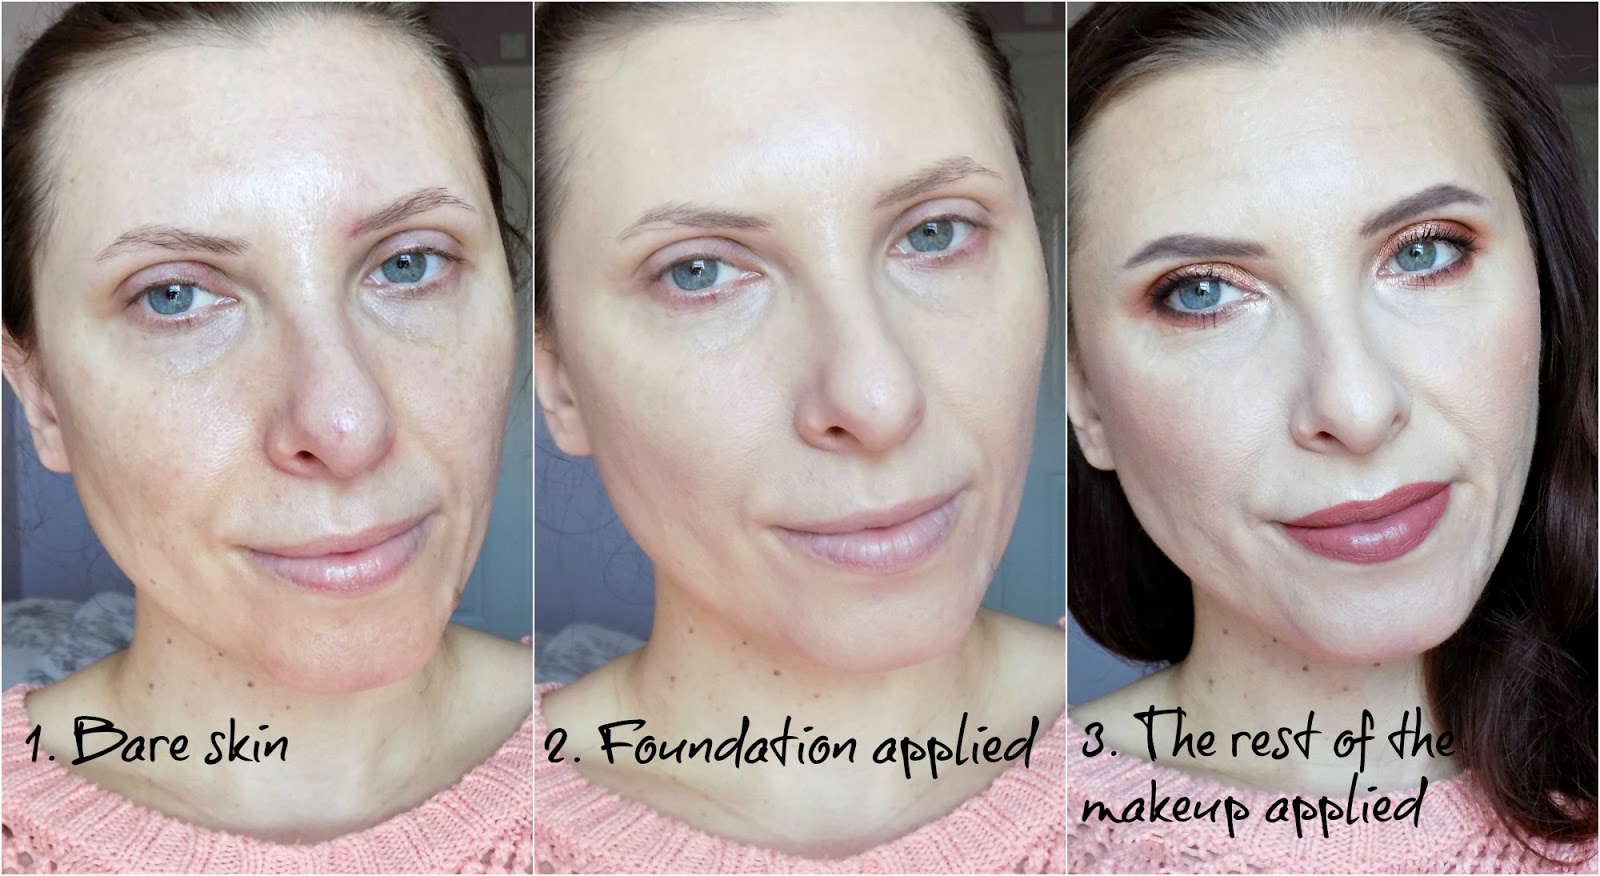 No7 Lift & Luminate Triple Action Serum Foundation, before and after photos 